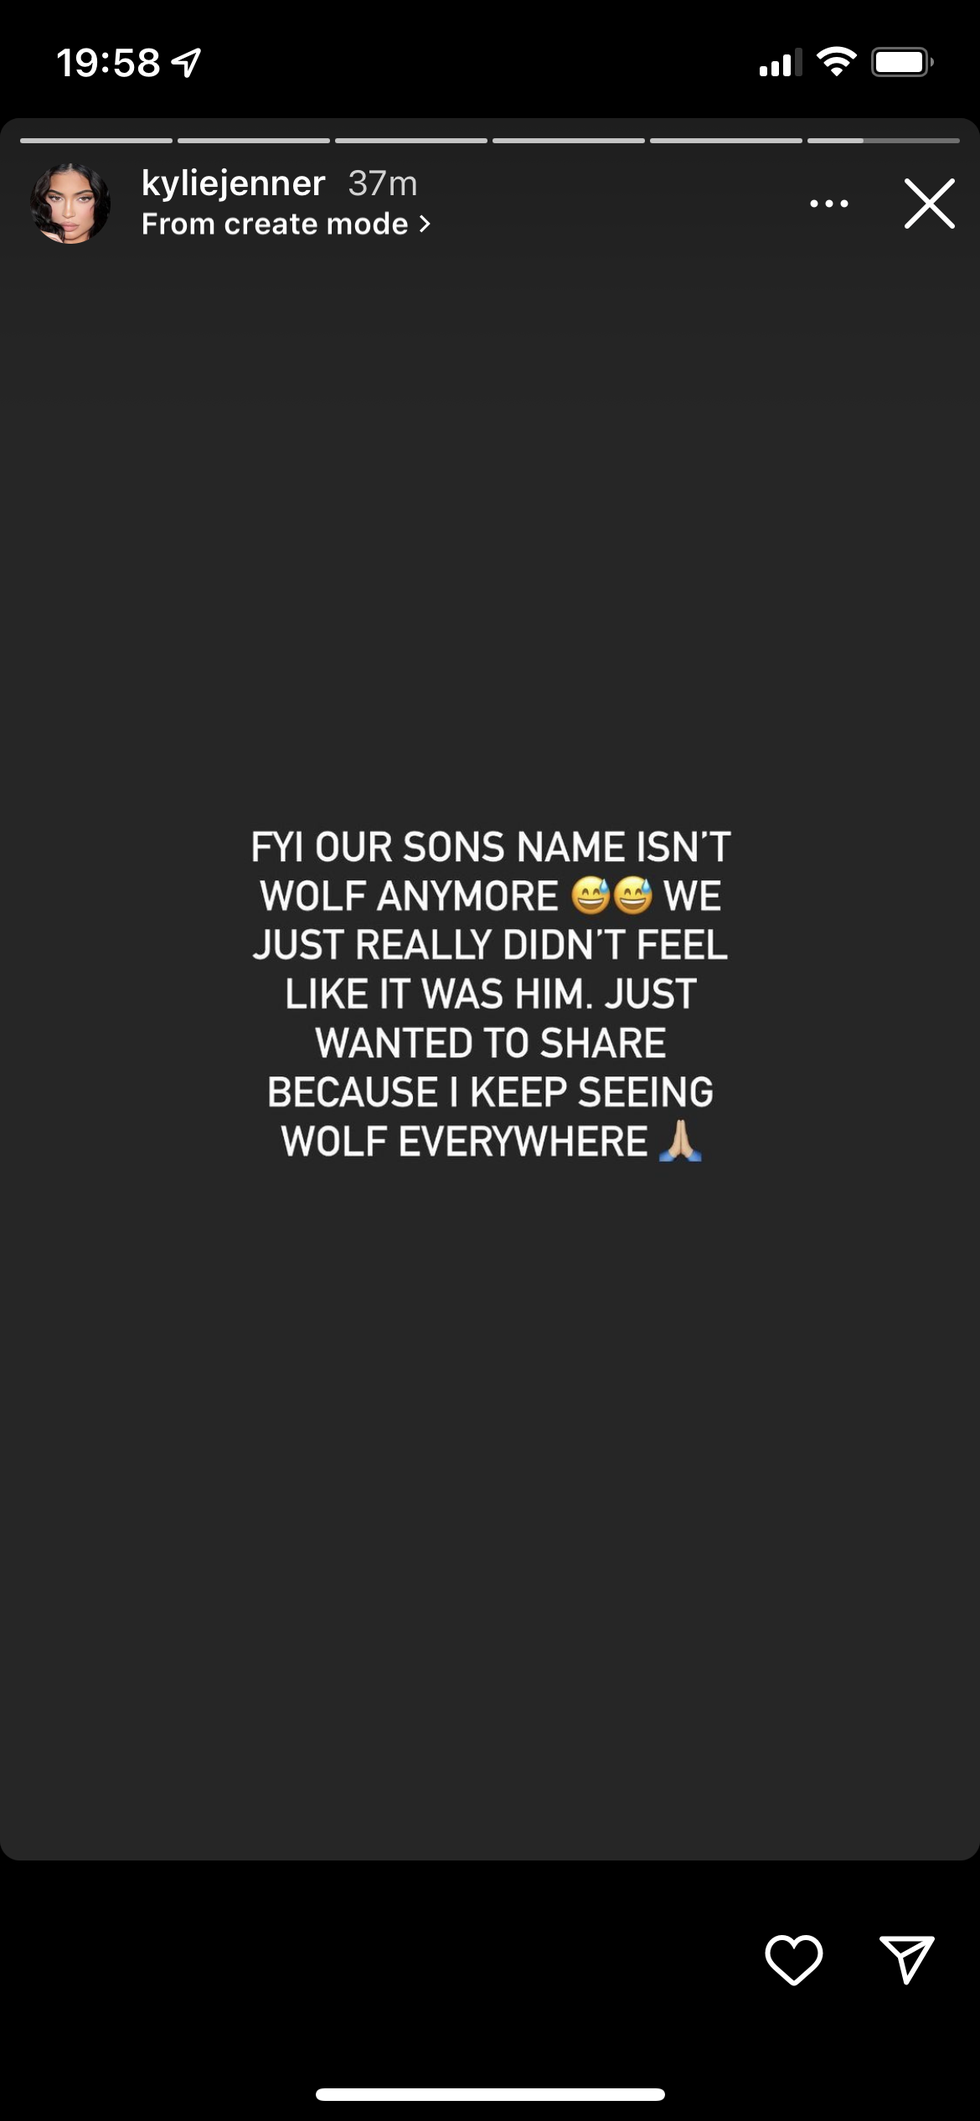 kylie jenner announcing she changed wolf's name